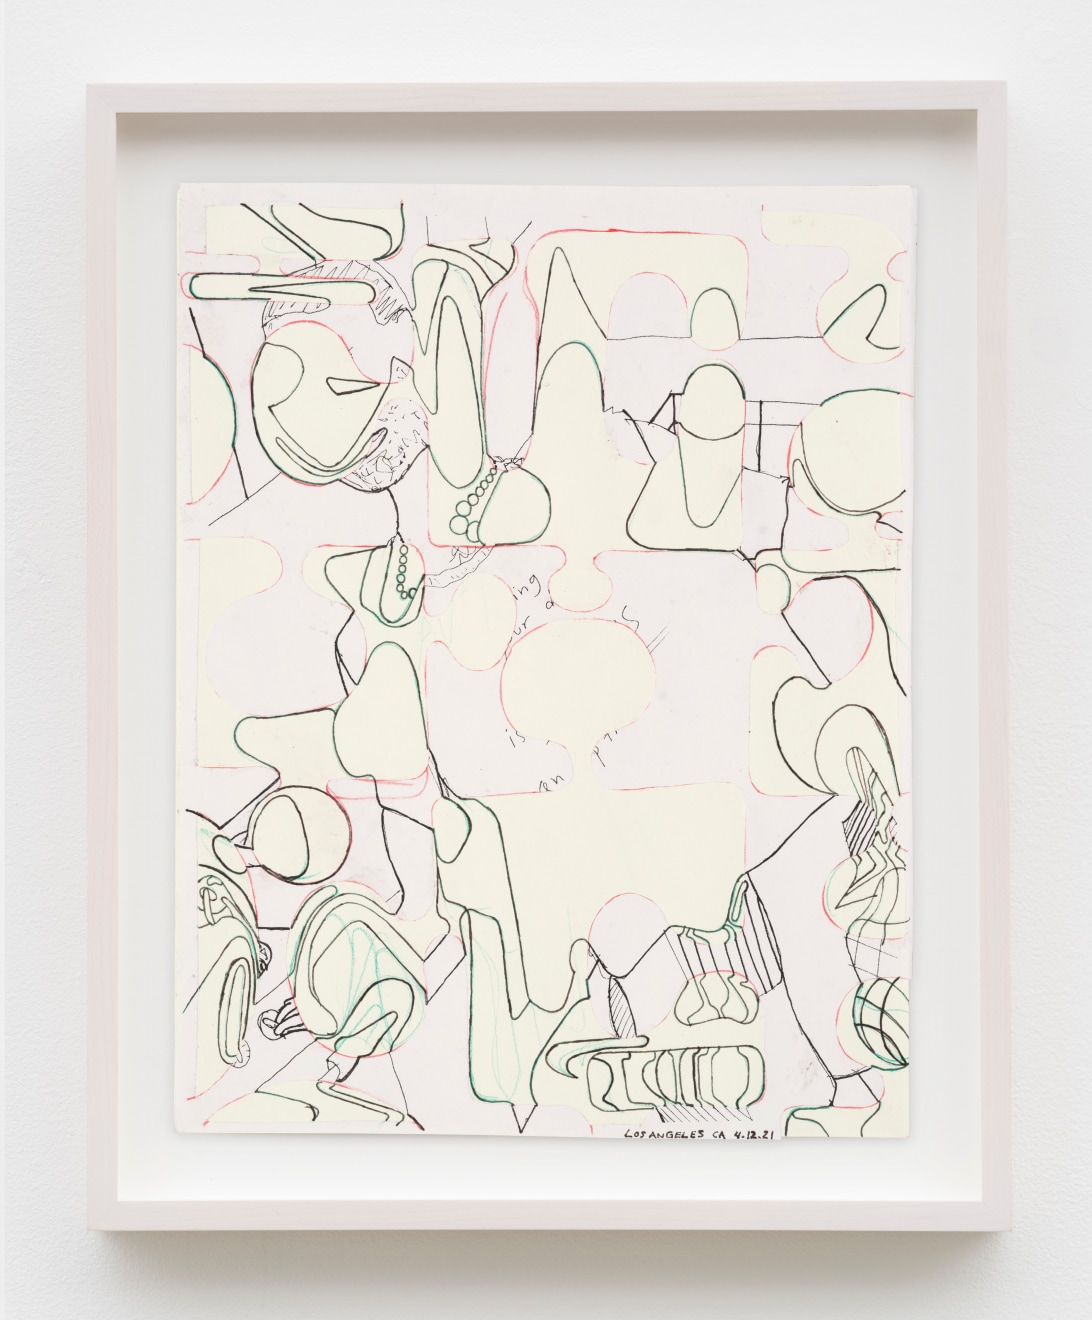 Michael Williams, Untitled Puzzle Drawing, 2021